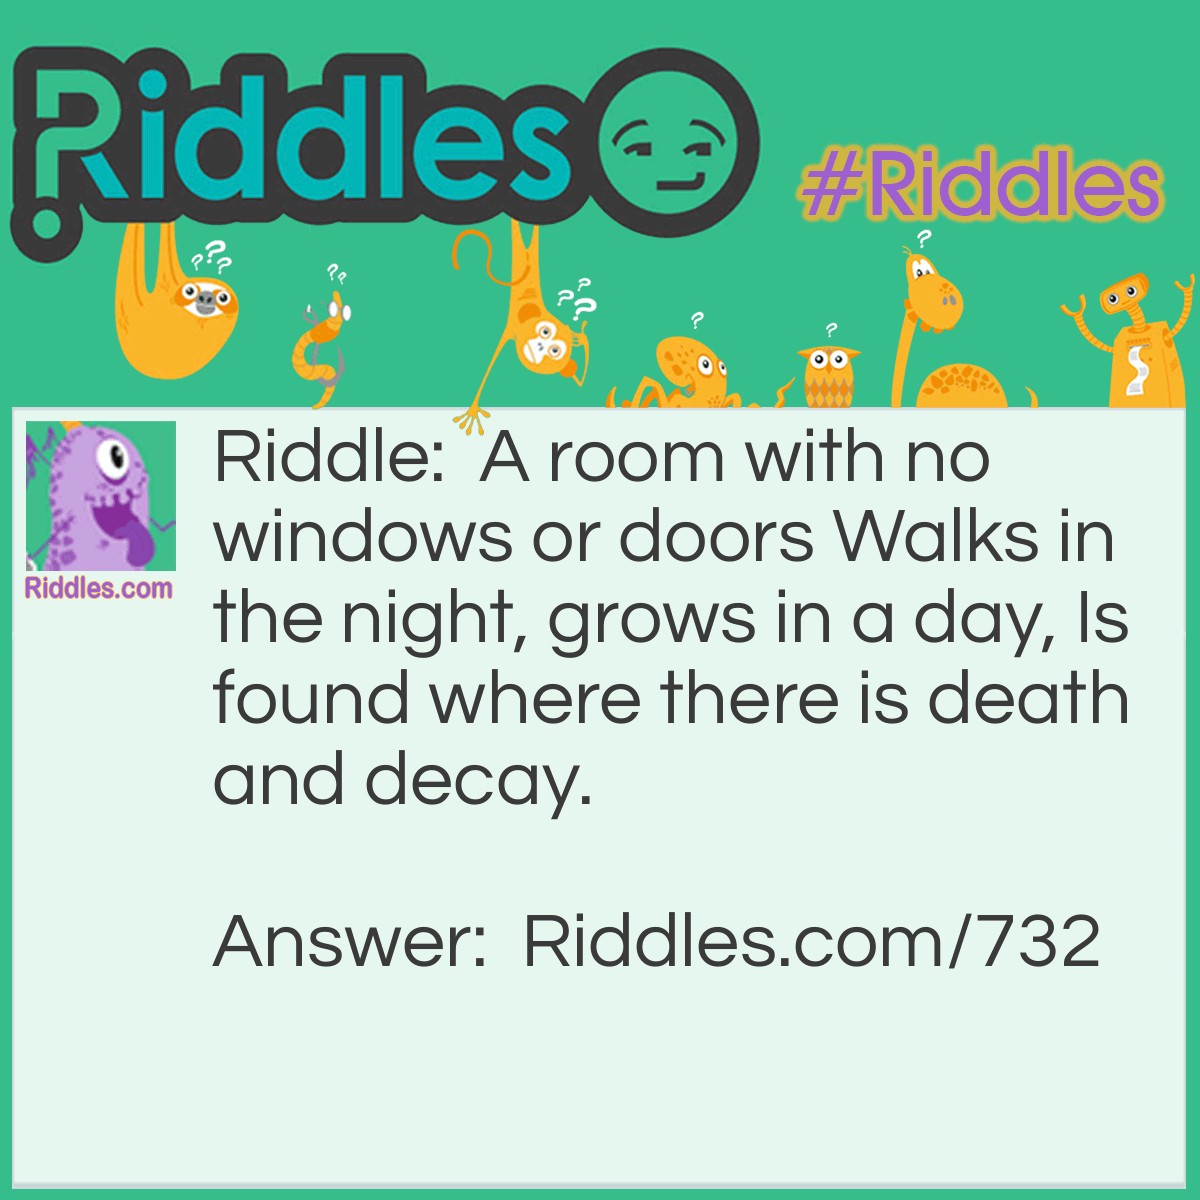 Riddle: A room with no windows or doors, walks in the night, grows in a day, is found where there is death and decay. What is it? Answer: Mushrooms.